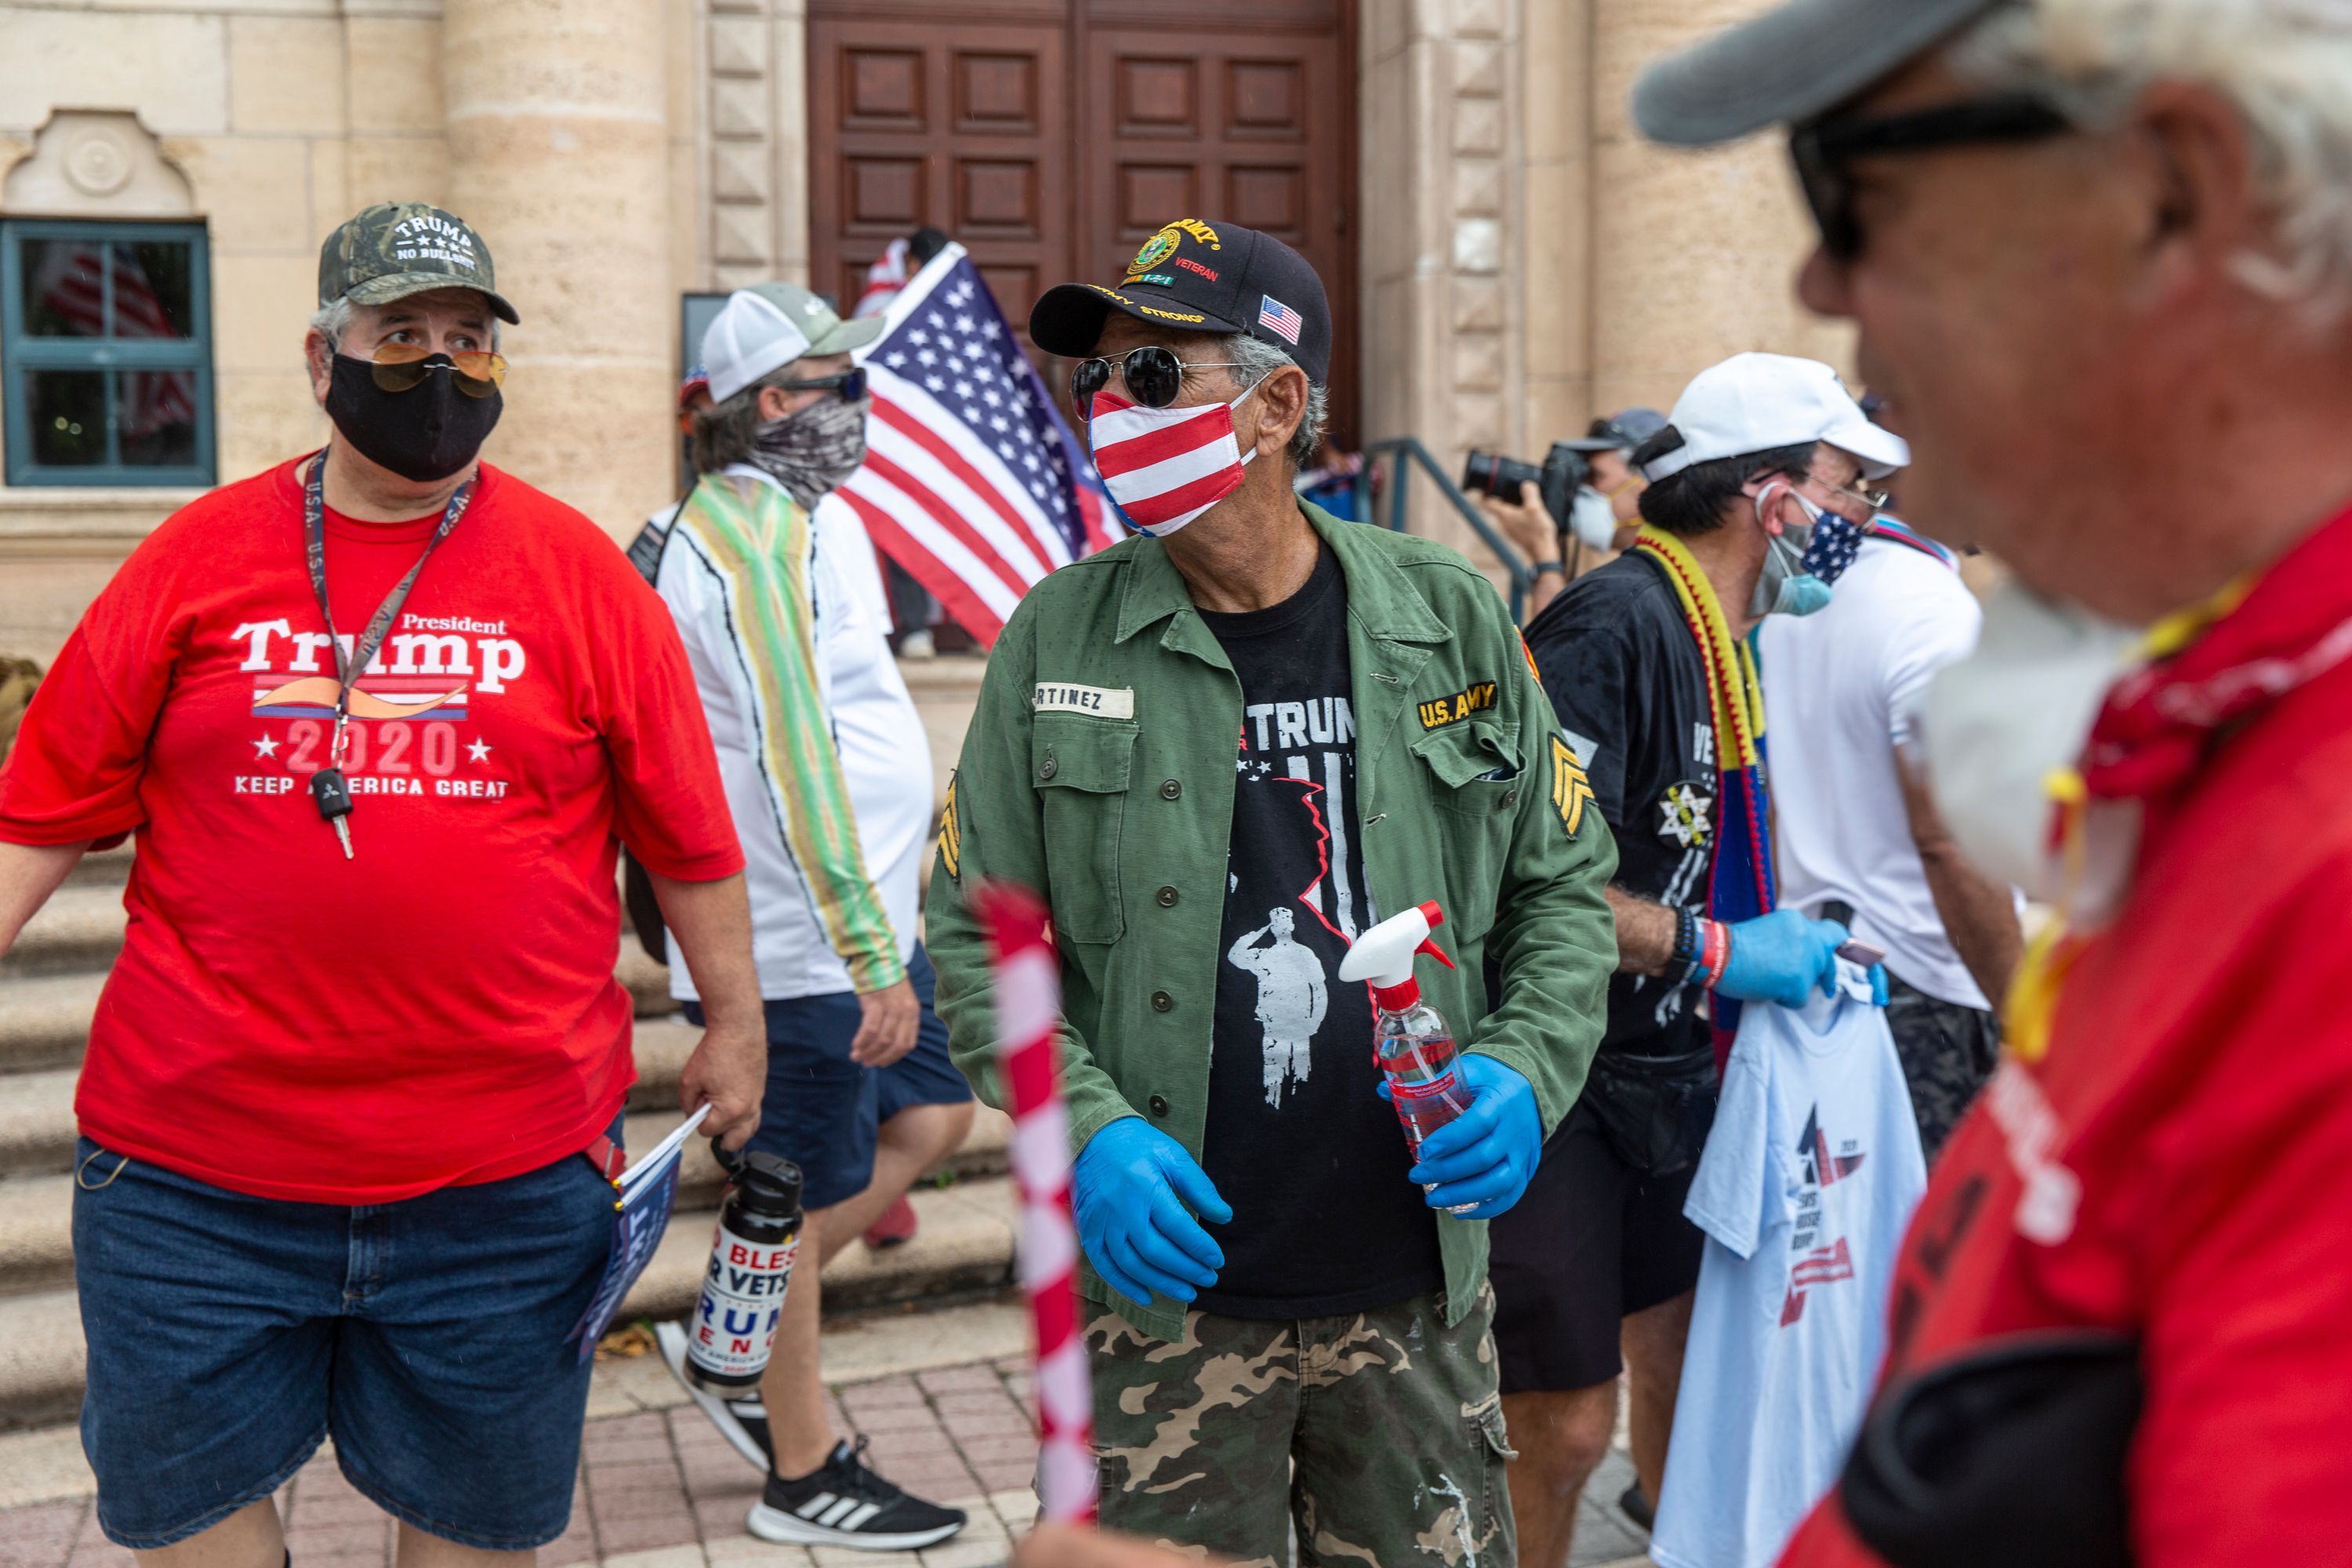 In this image, men wear face masks and sunglasses and stand outside.